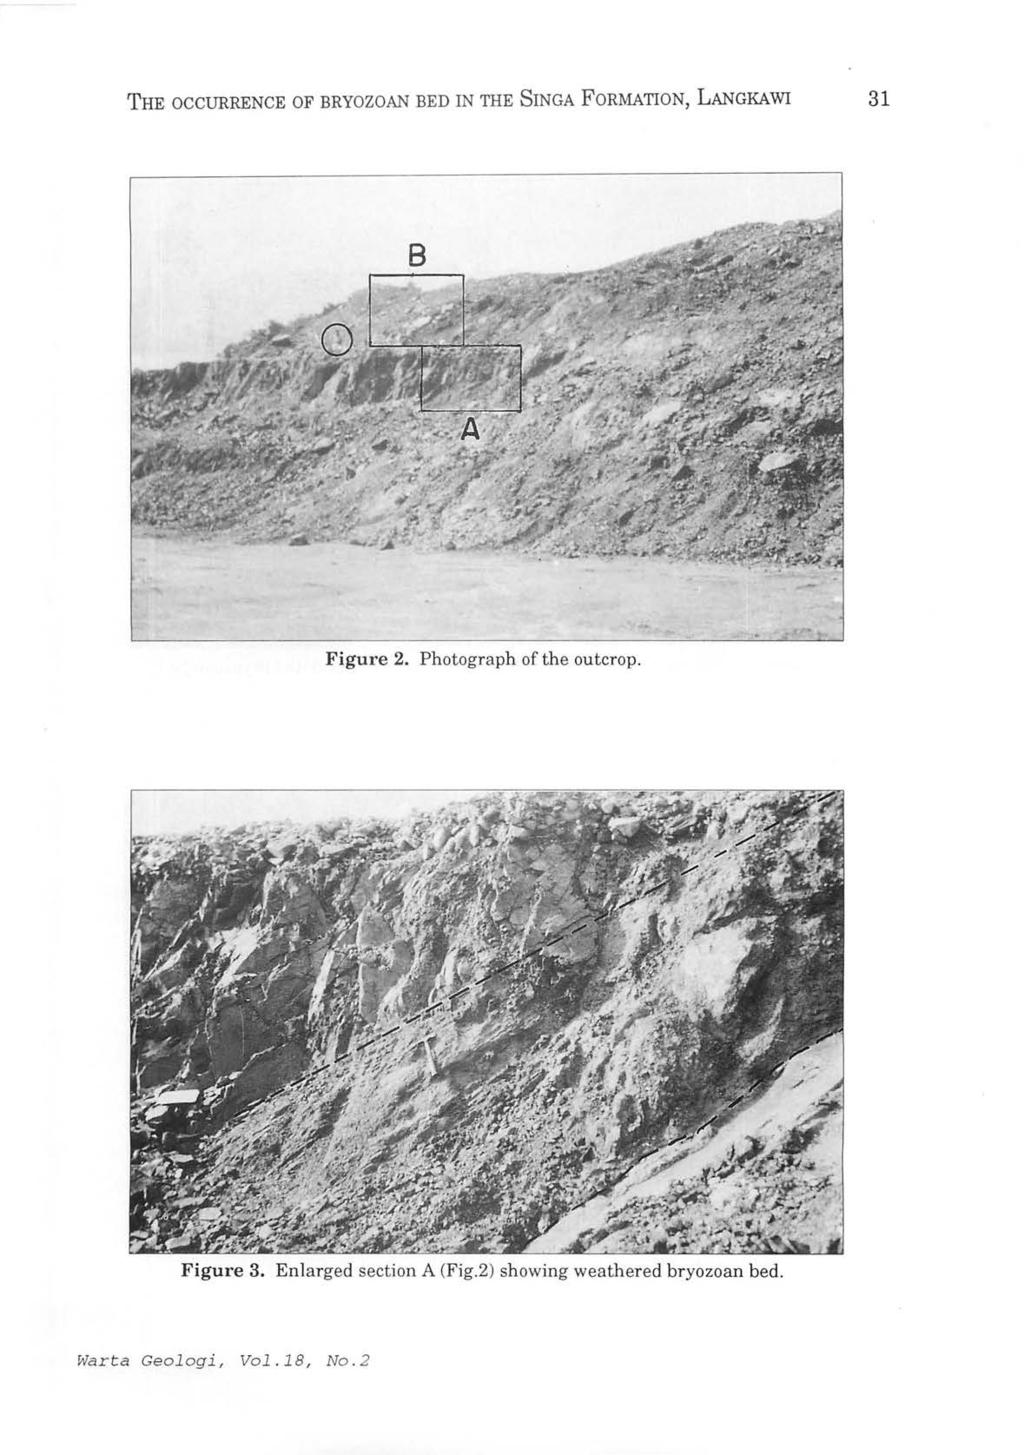 THE OCCURRENCE OF BRYOZOAN BED IN THE SINGA FORMATION, LANGKAWI 31 Figure 2.